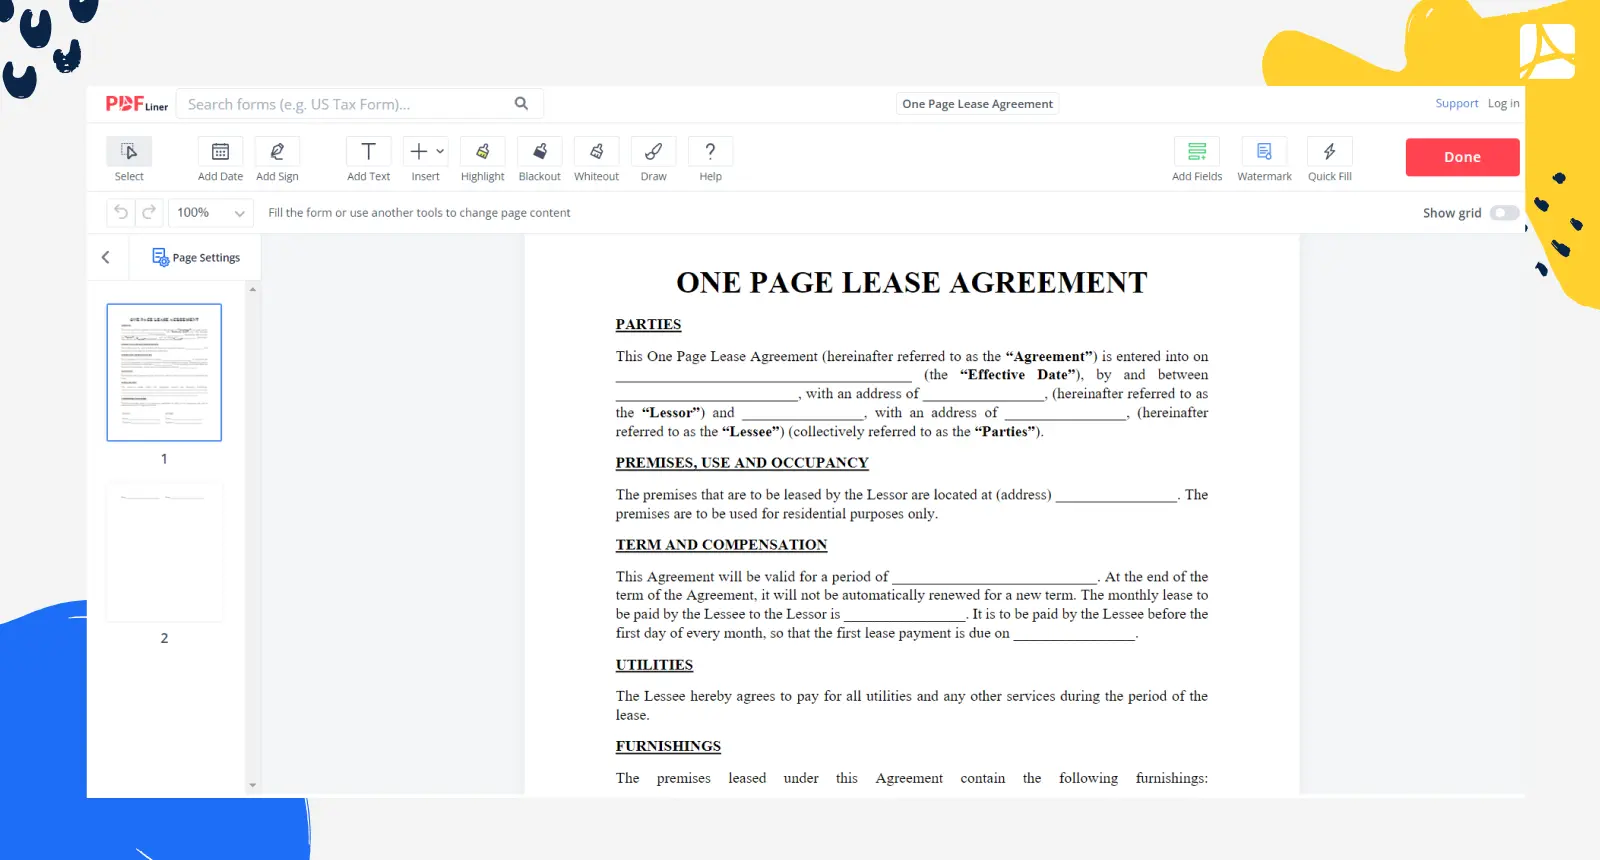 One Page Lease Agreement Form Screenshot